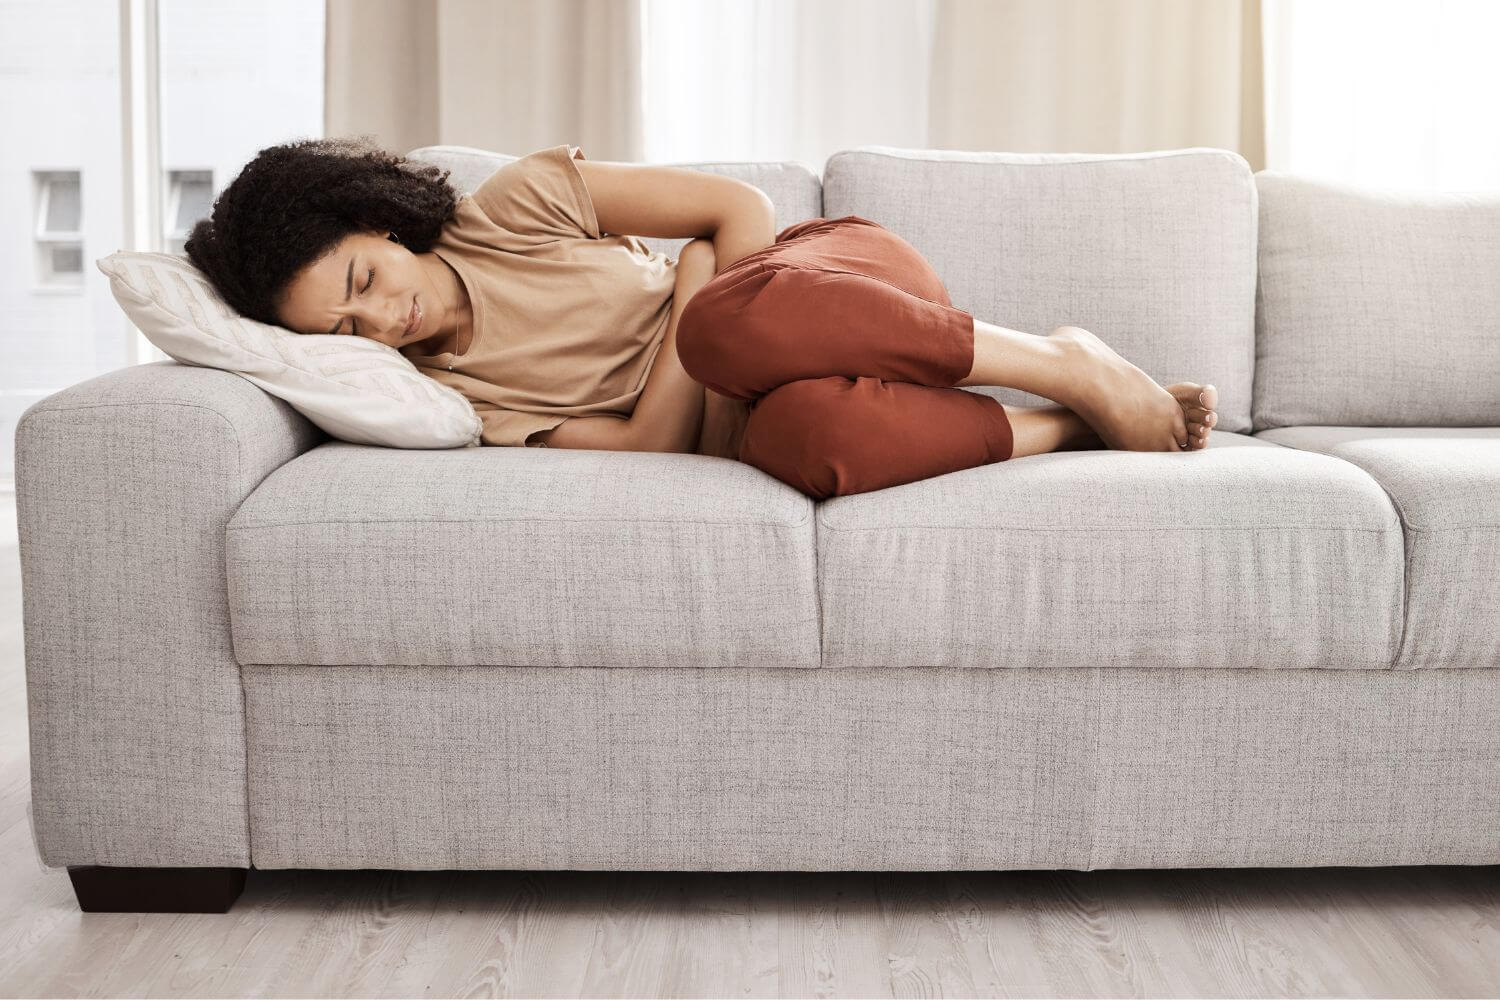 Woman in pain laying on a couch in the fetal position